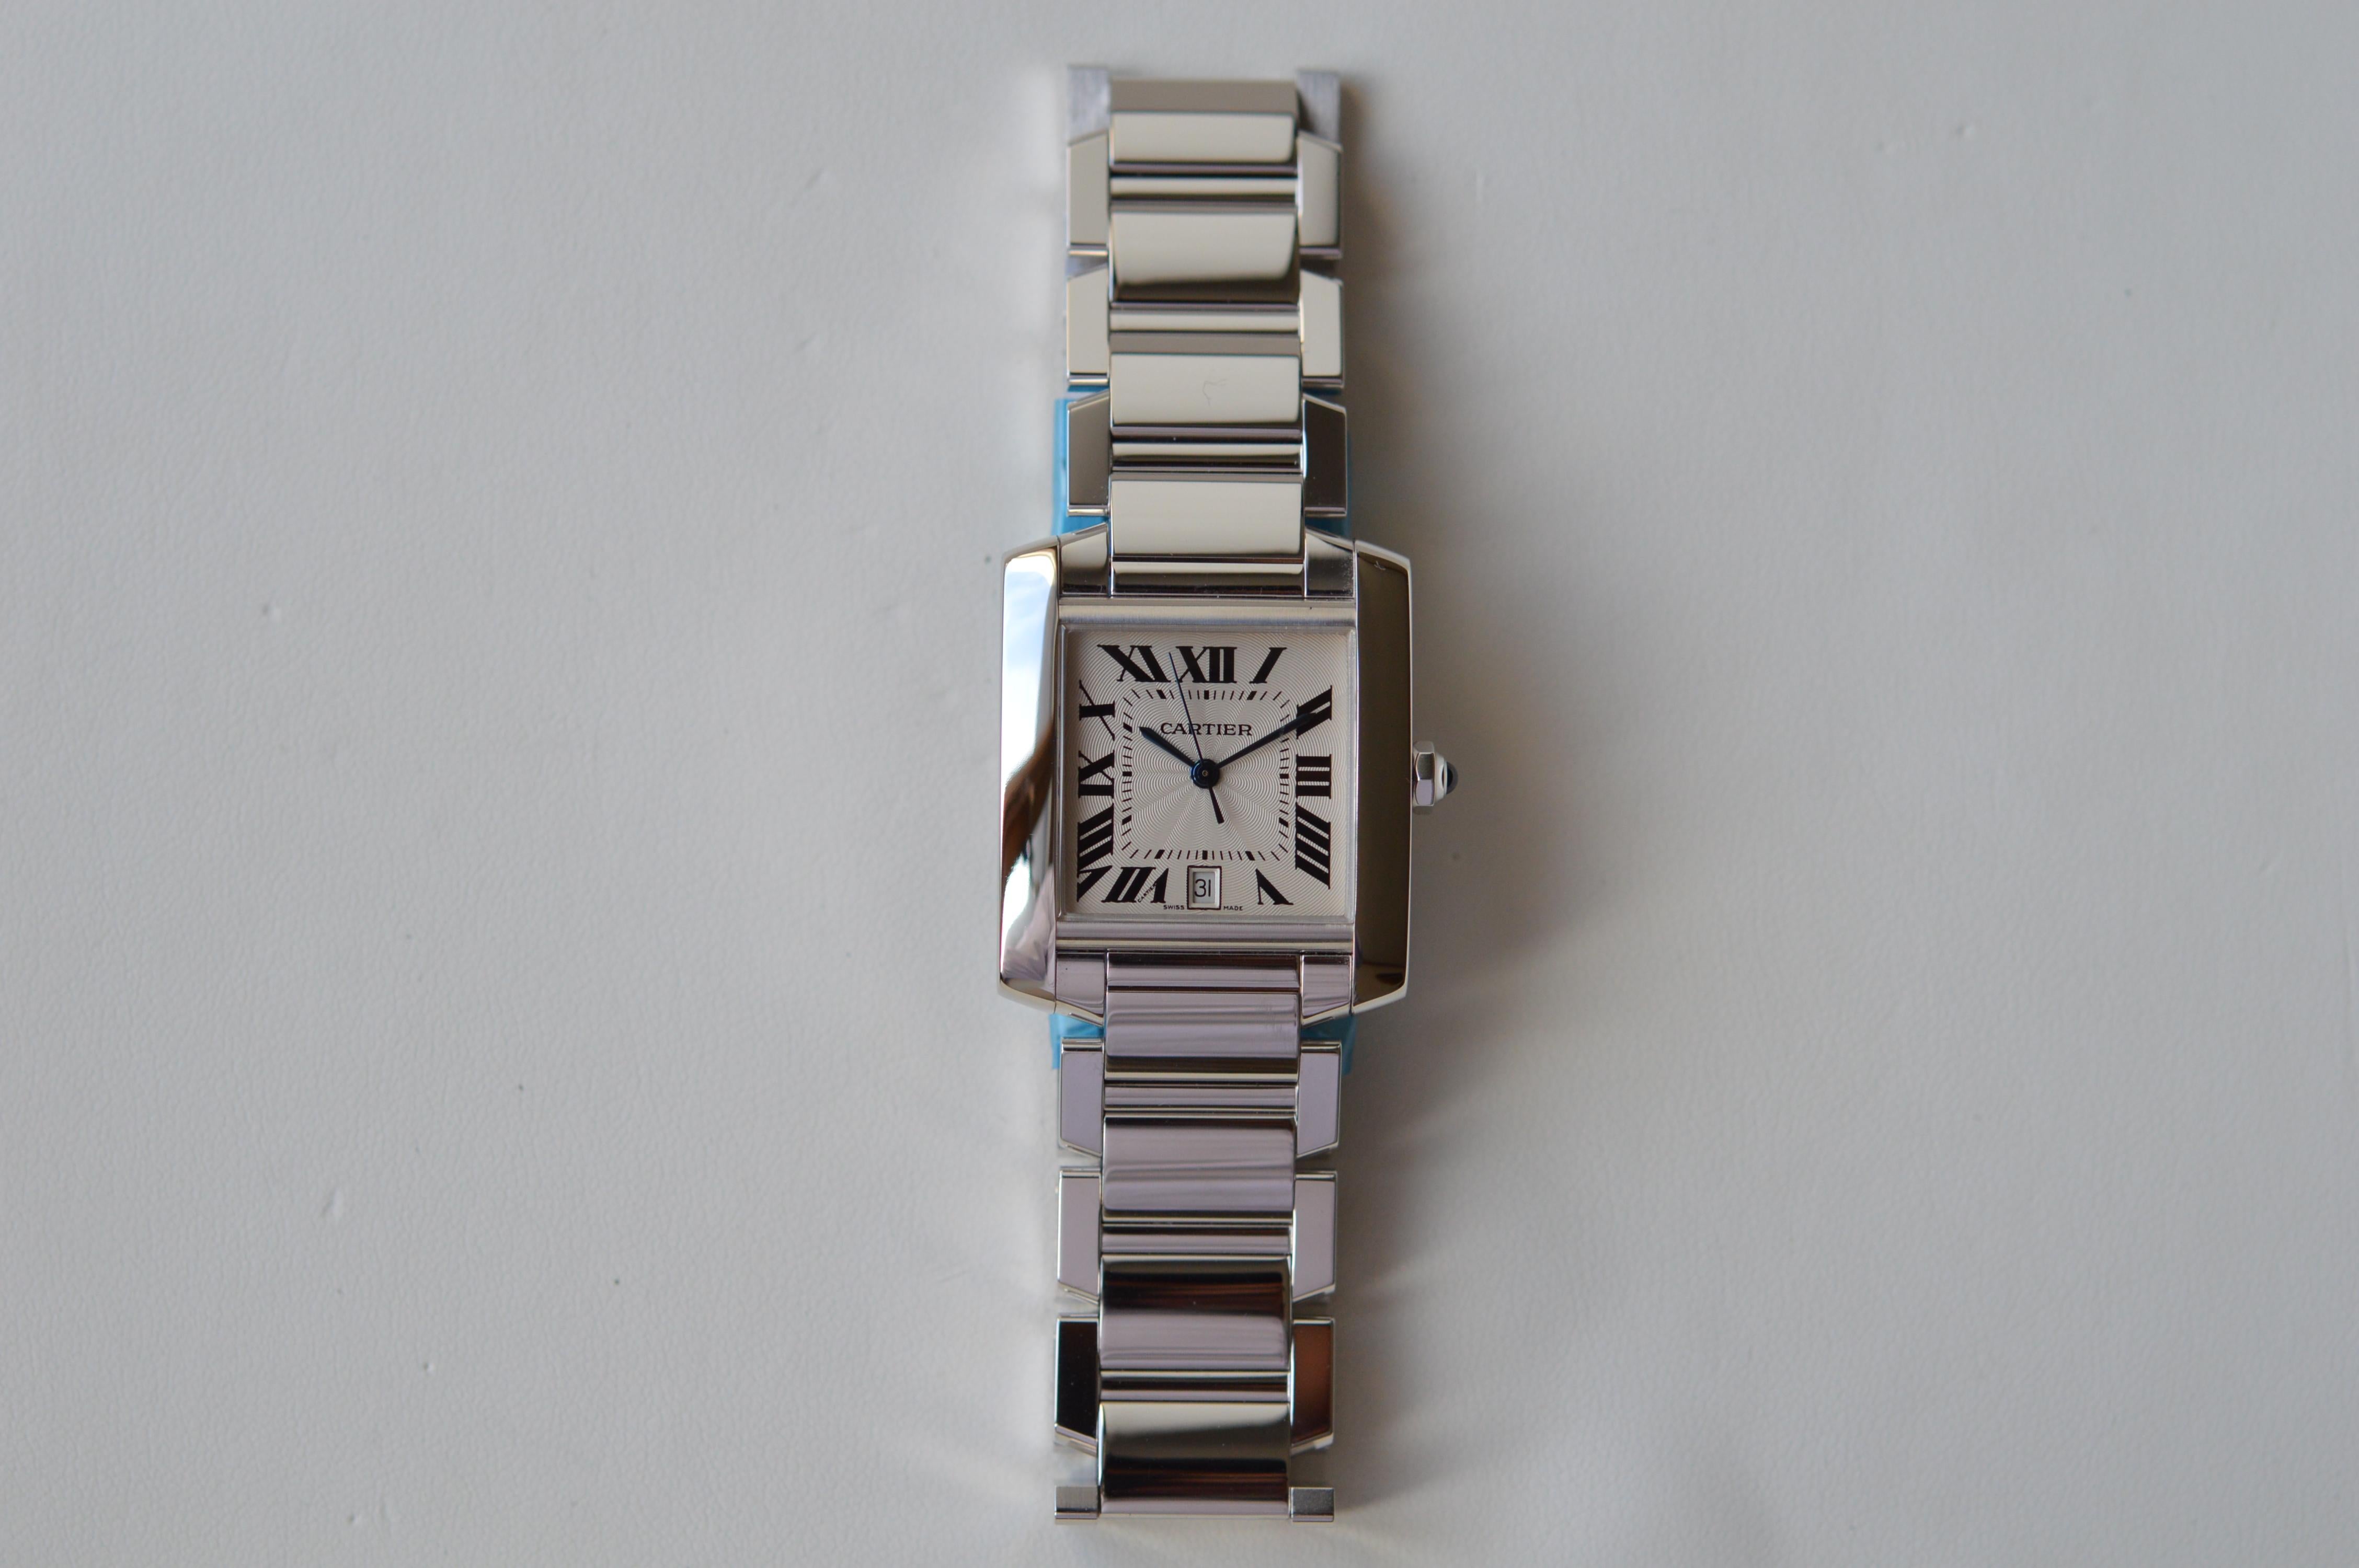 Cartier Tank Française GM 18k Full White Gold
Grand Model (GM)
35mm X 20mm
In Full 18K White Gold
Reference n° W50011S3
Guilloché Silver Dial with Roman Numerals
Water-Resistant
Automatic Movement
New Old Stock Condition
Brand new never used
With